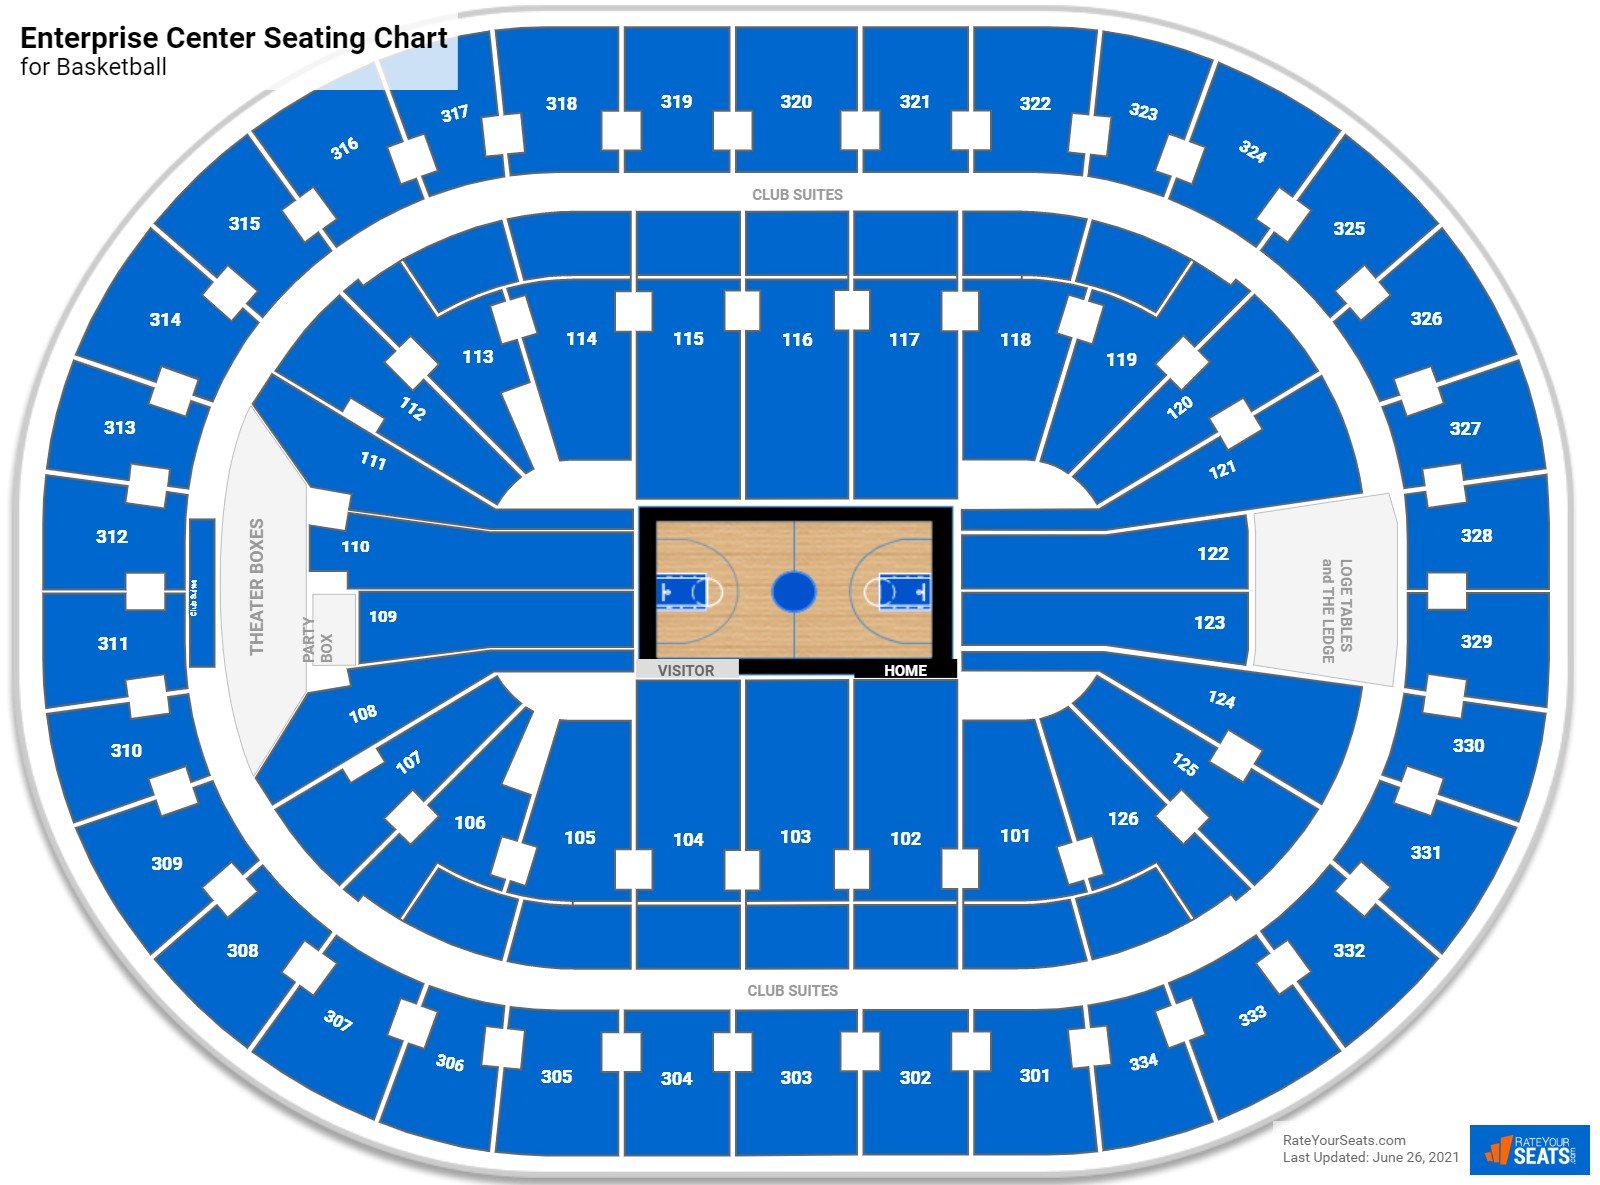 Seating Charts for Enterprise Center.